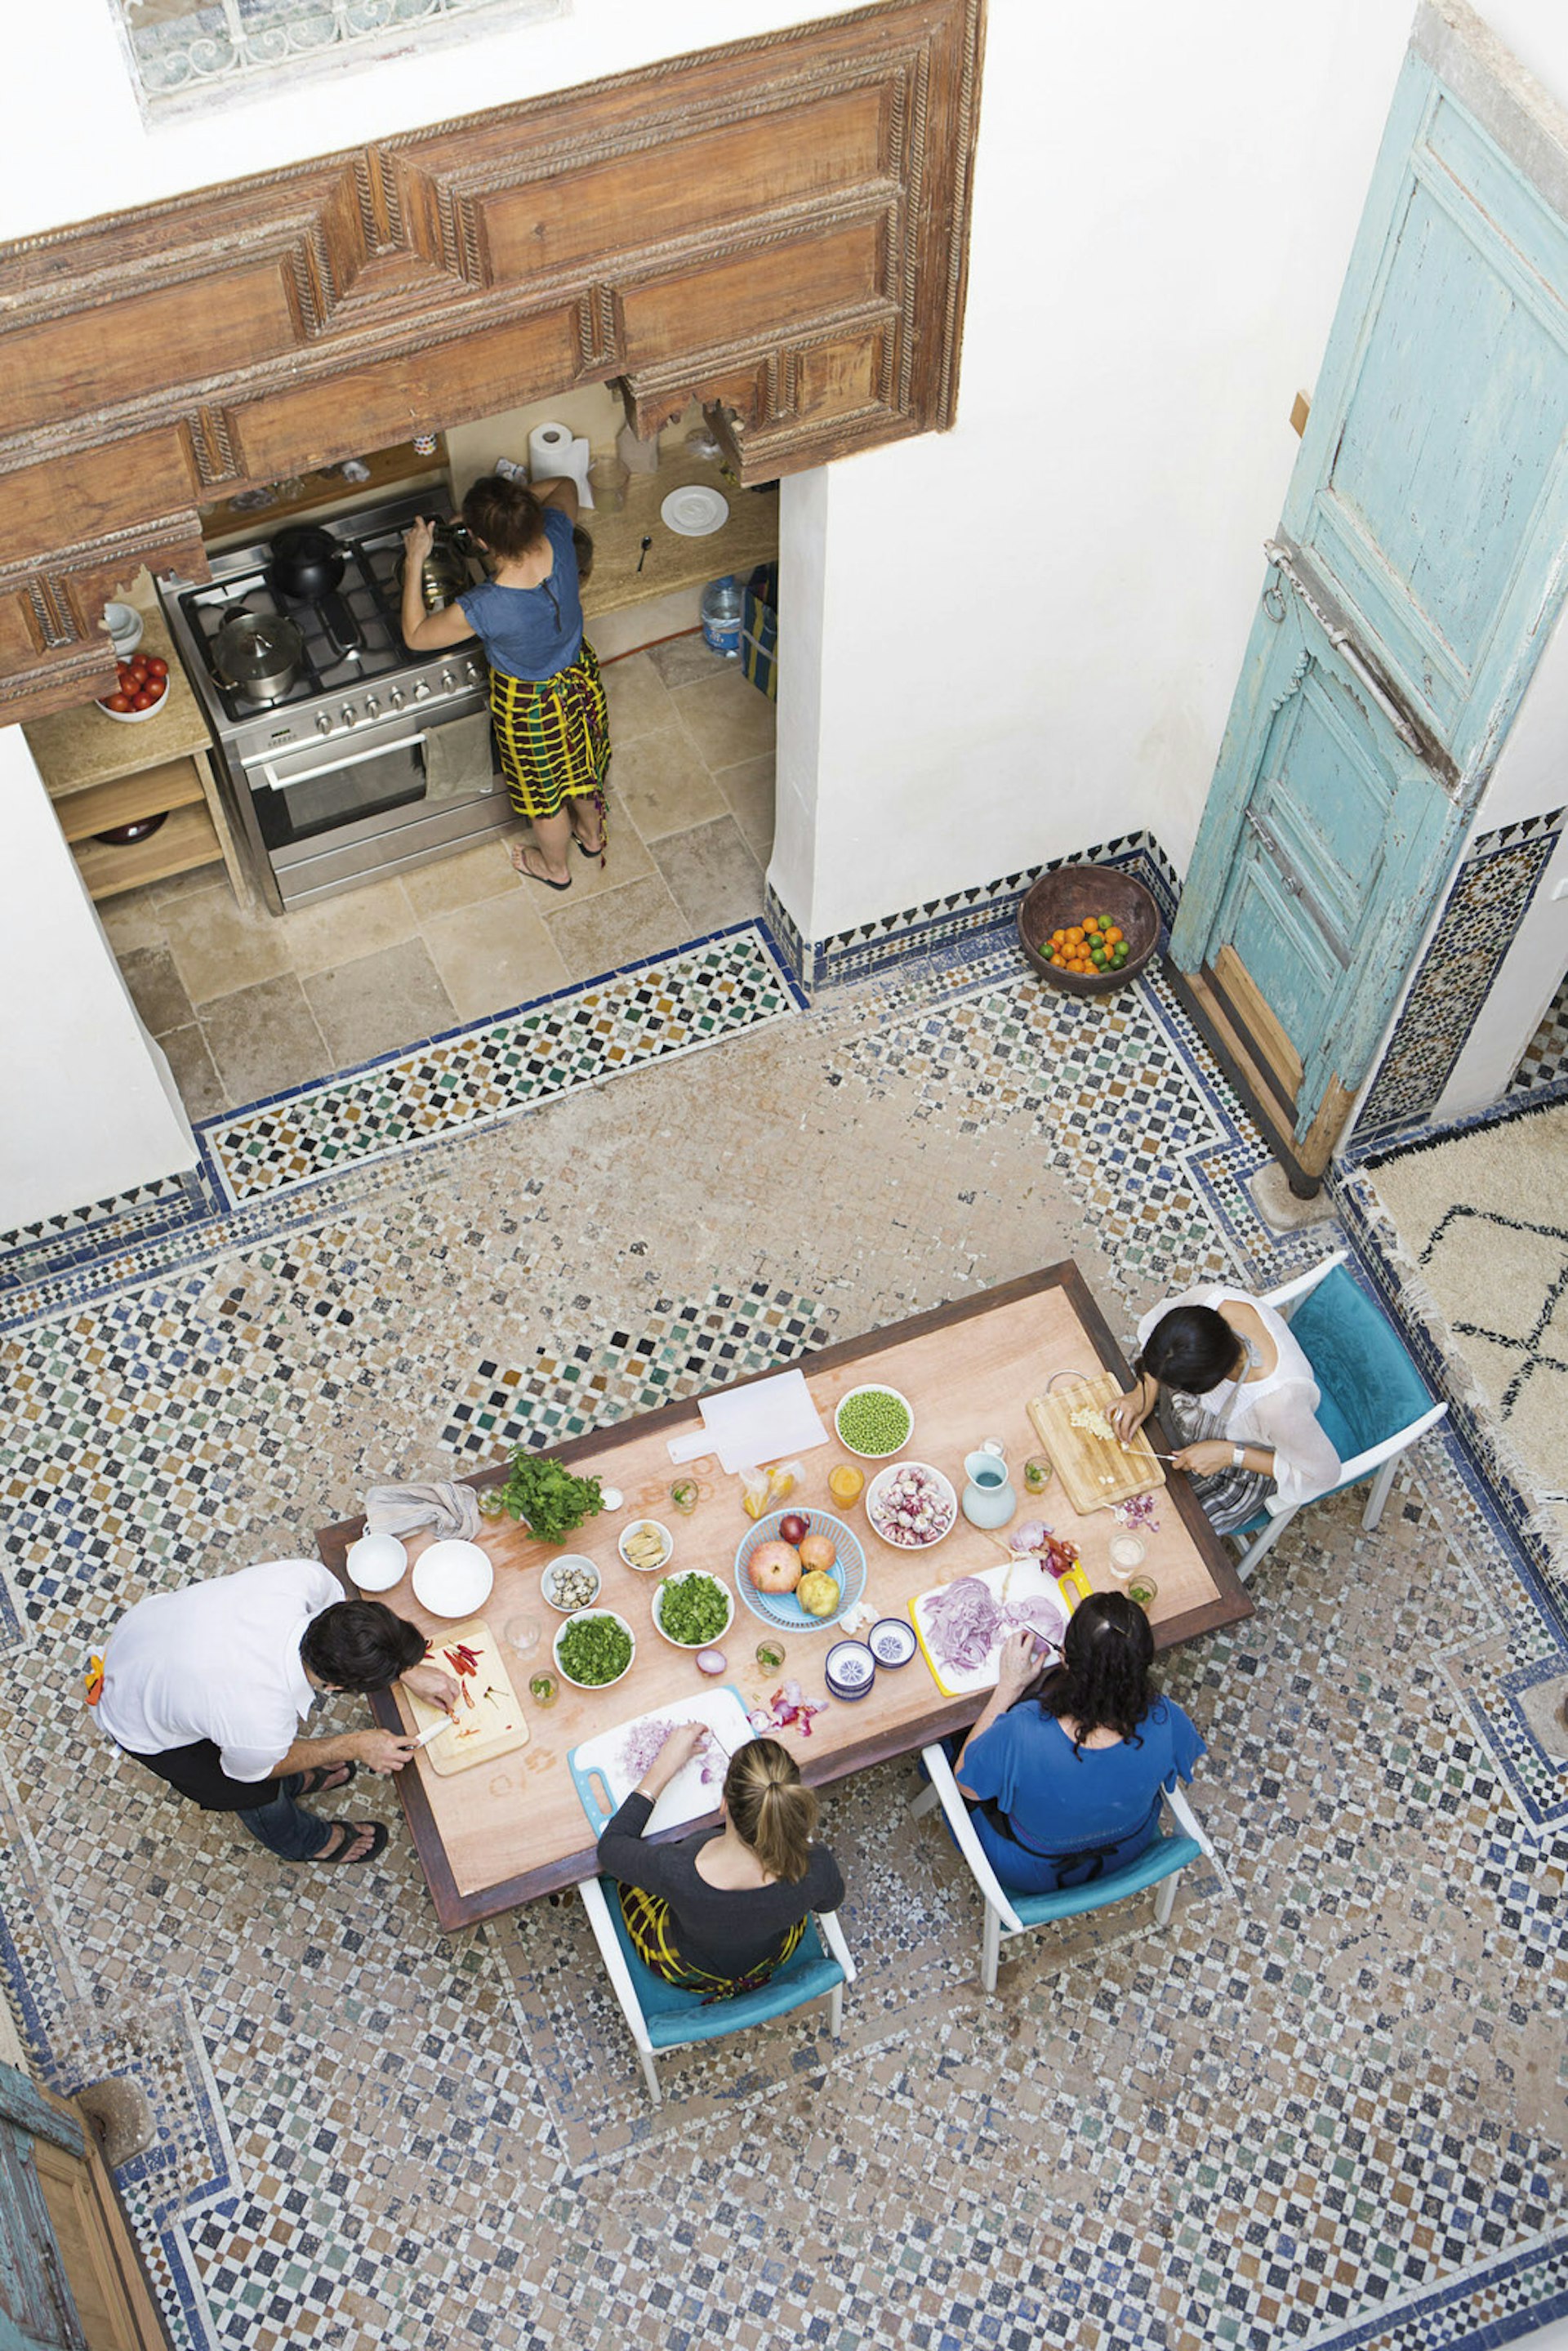 Cooking class in progress at The Courtyard Kitchen. Image by The Courtyard Kitchen